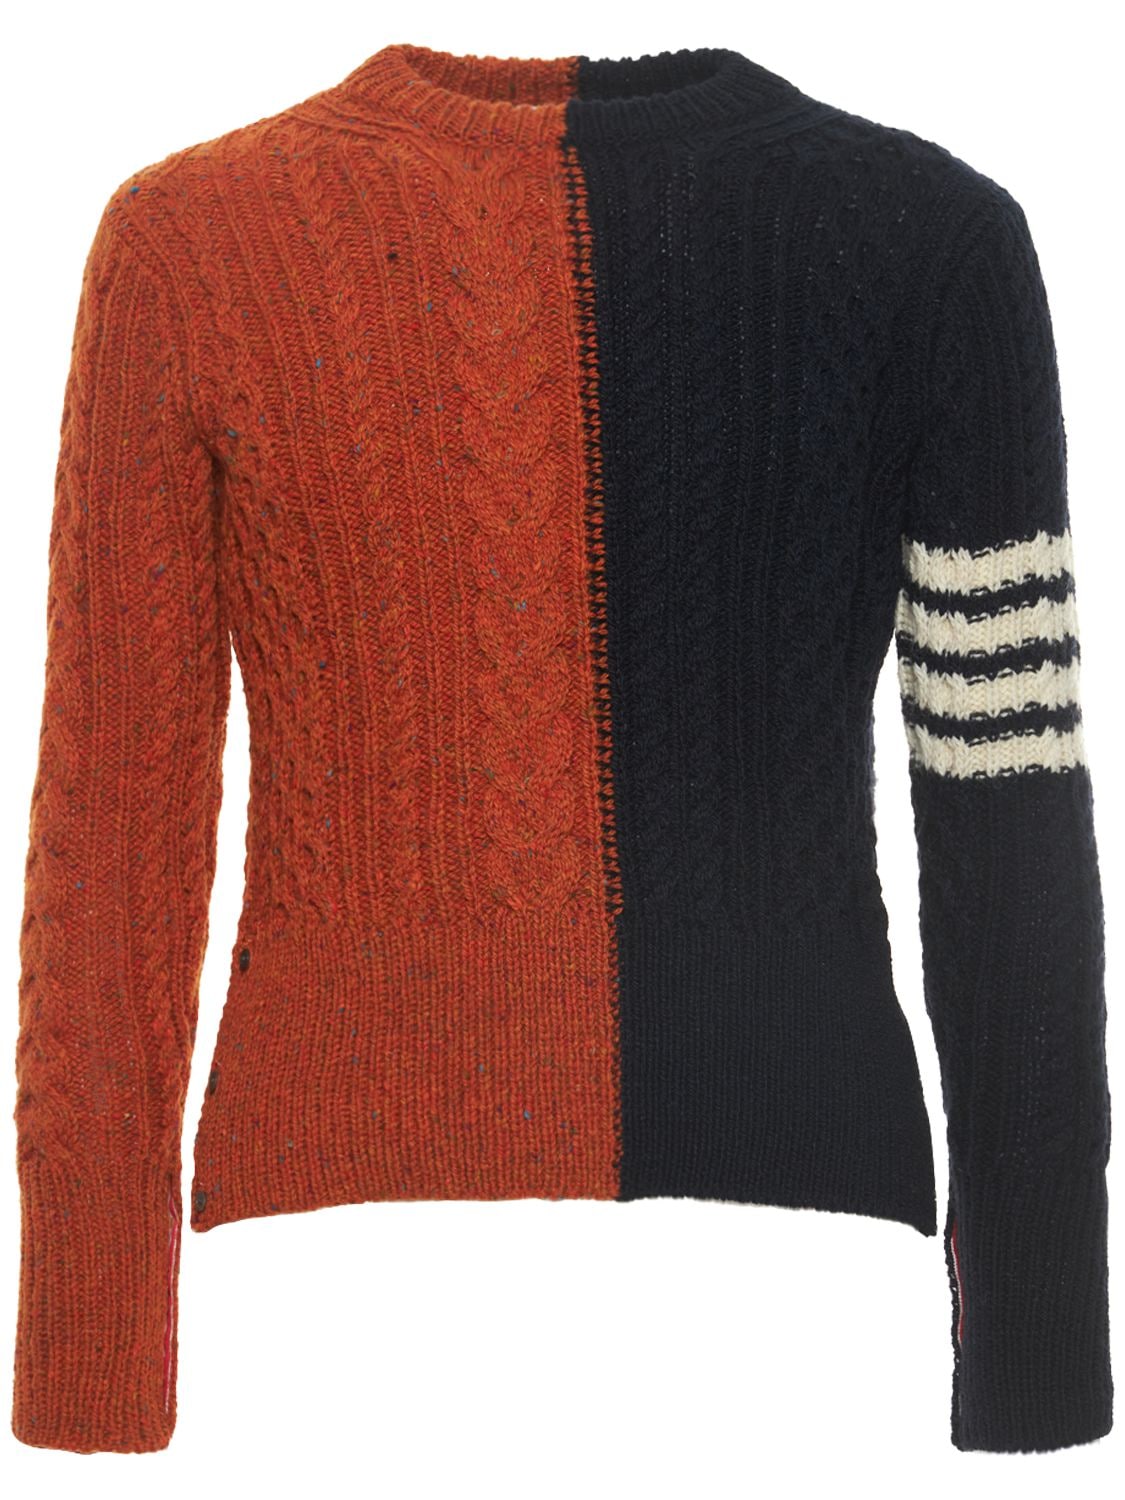 THOM BROWNE Aaran Cable Knit Sweater W/ 4 Bar